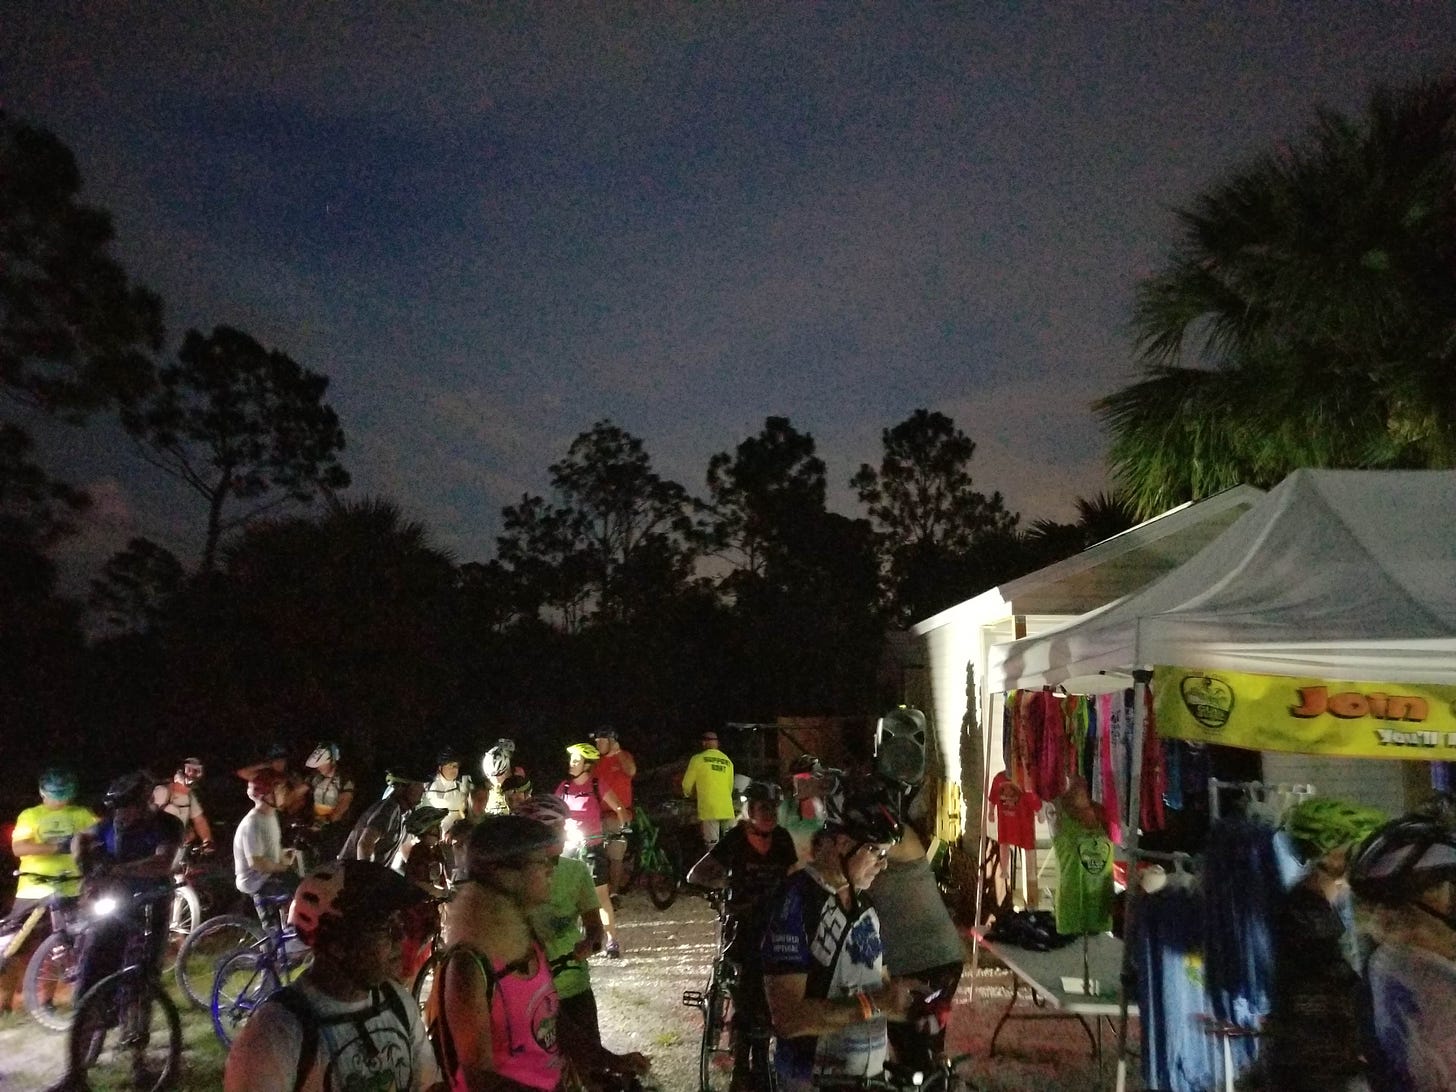 last light fades. a crowd of bikers prepare for the moonlit ride